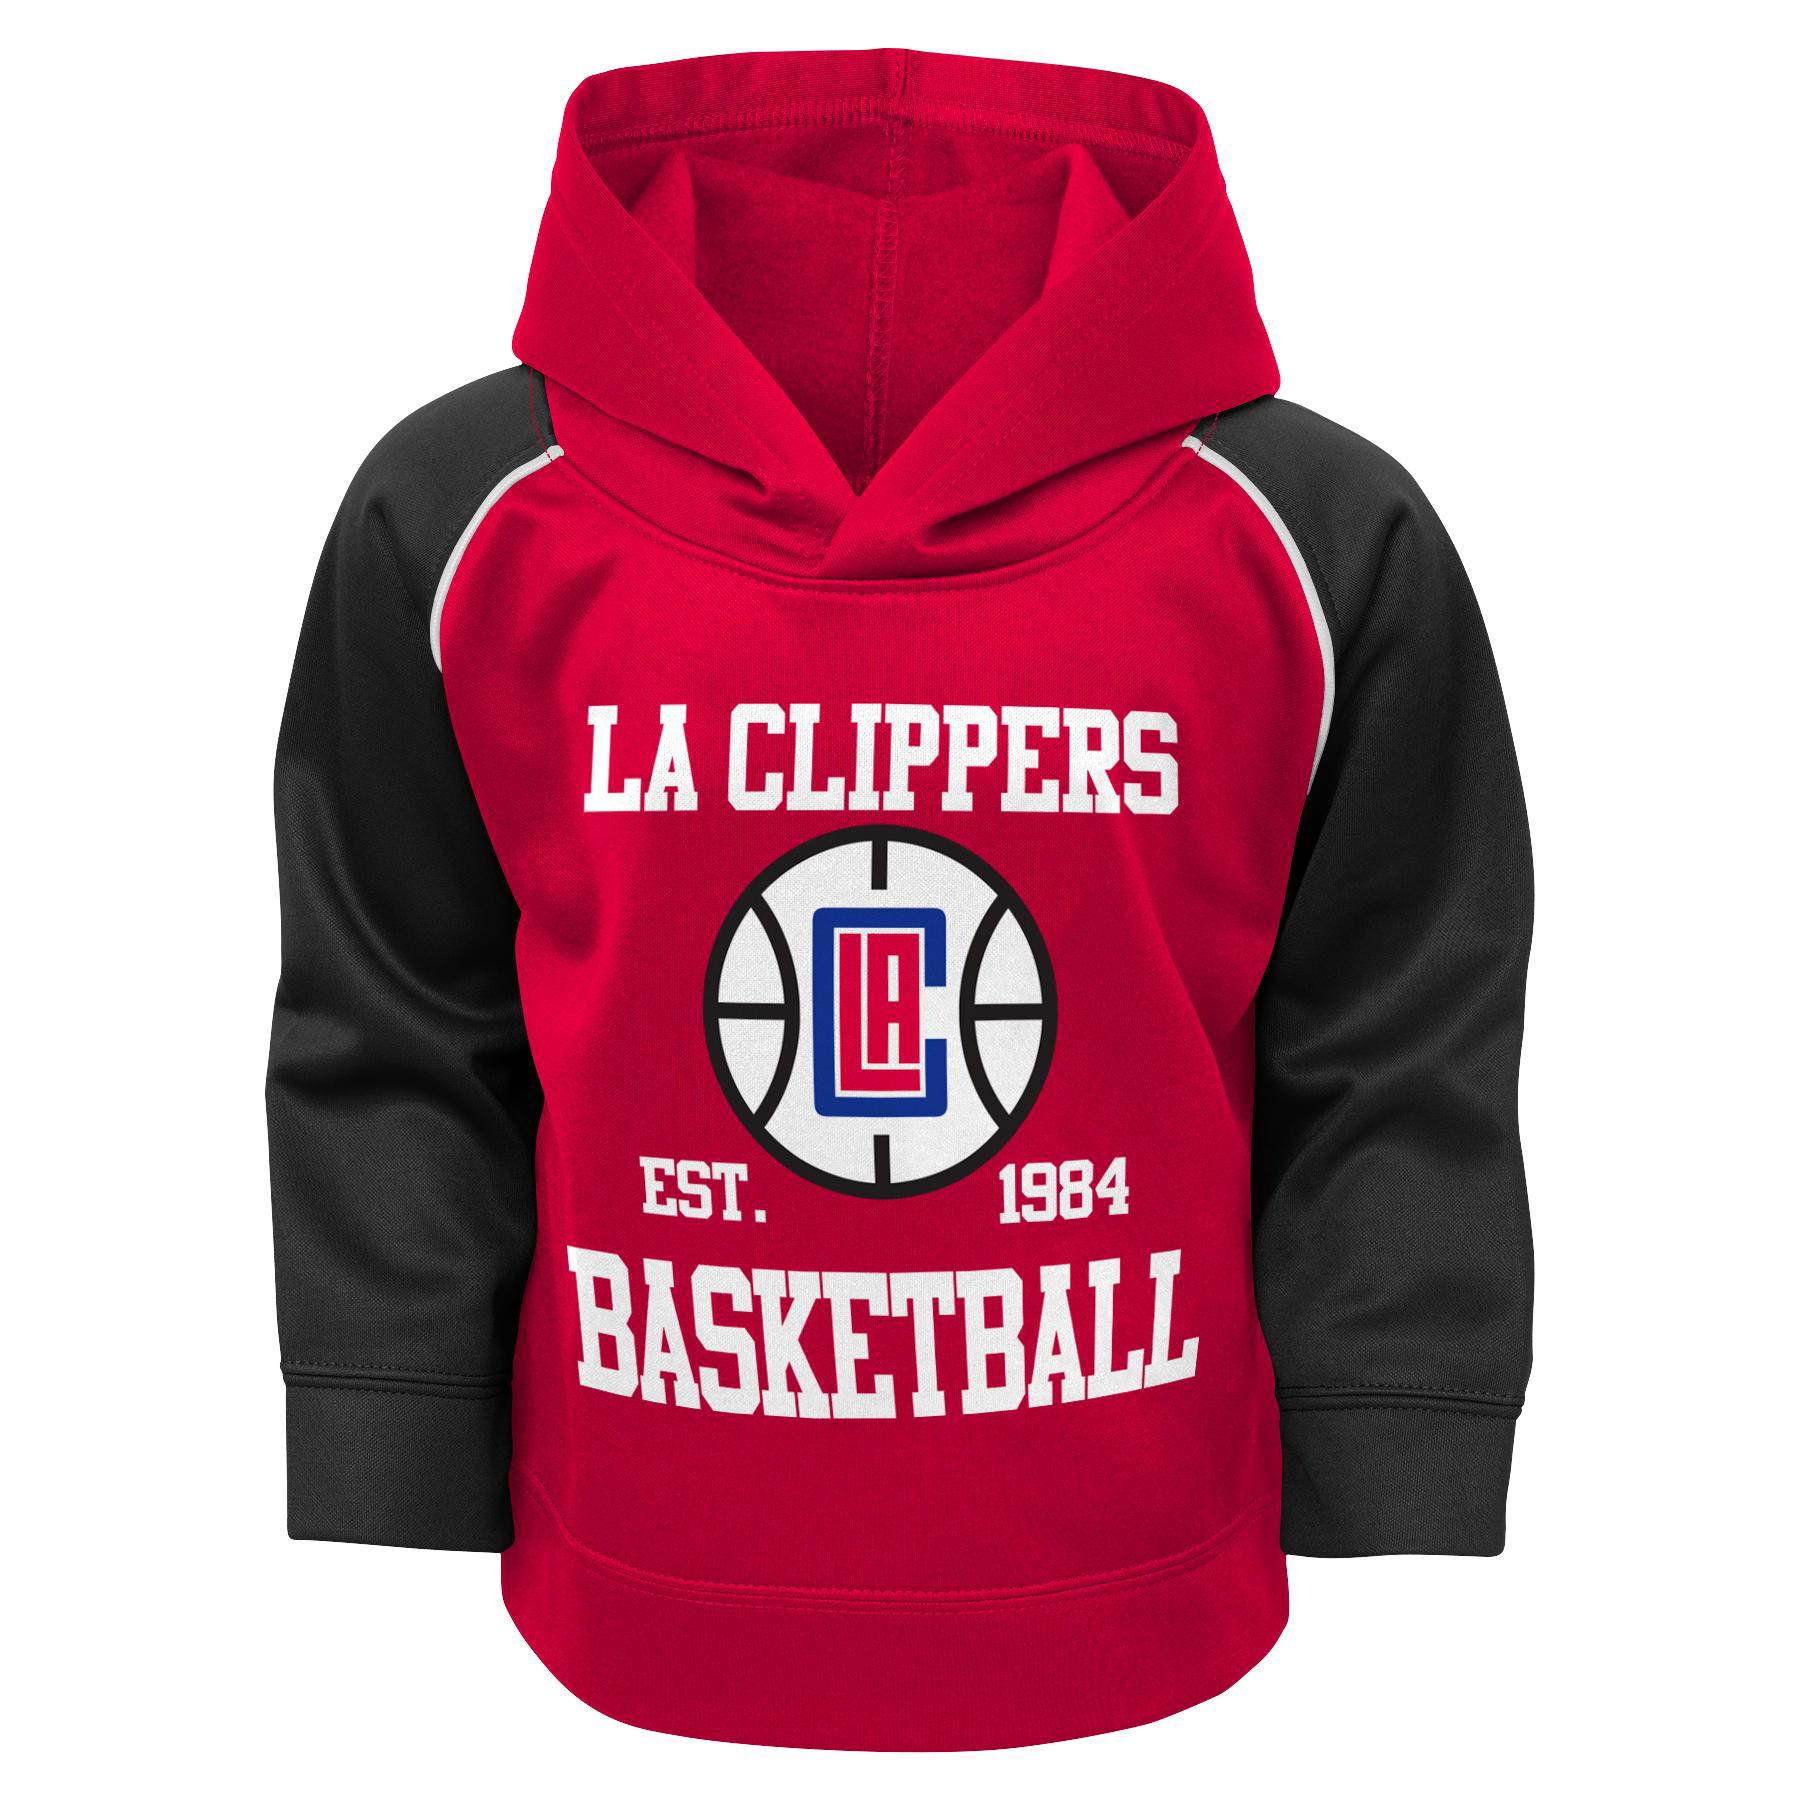 NBA Toddler Boys' Hoodie - Los Angeles Clippers